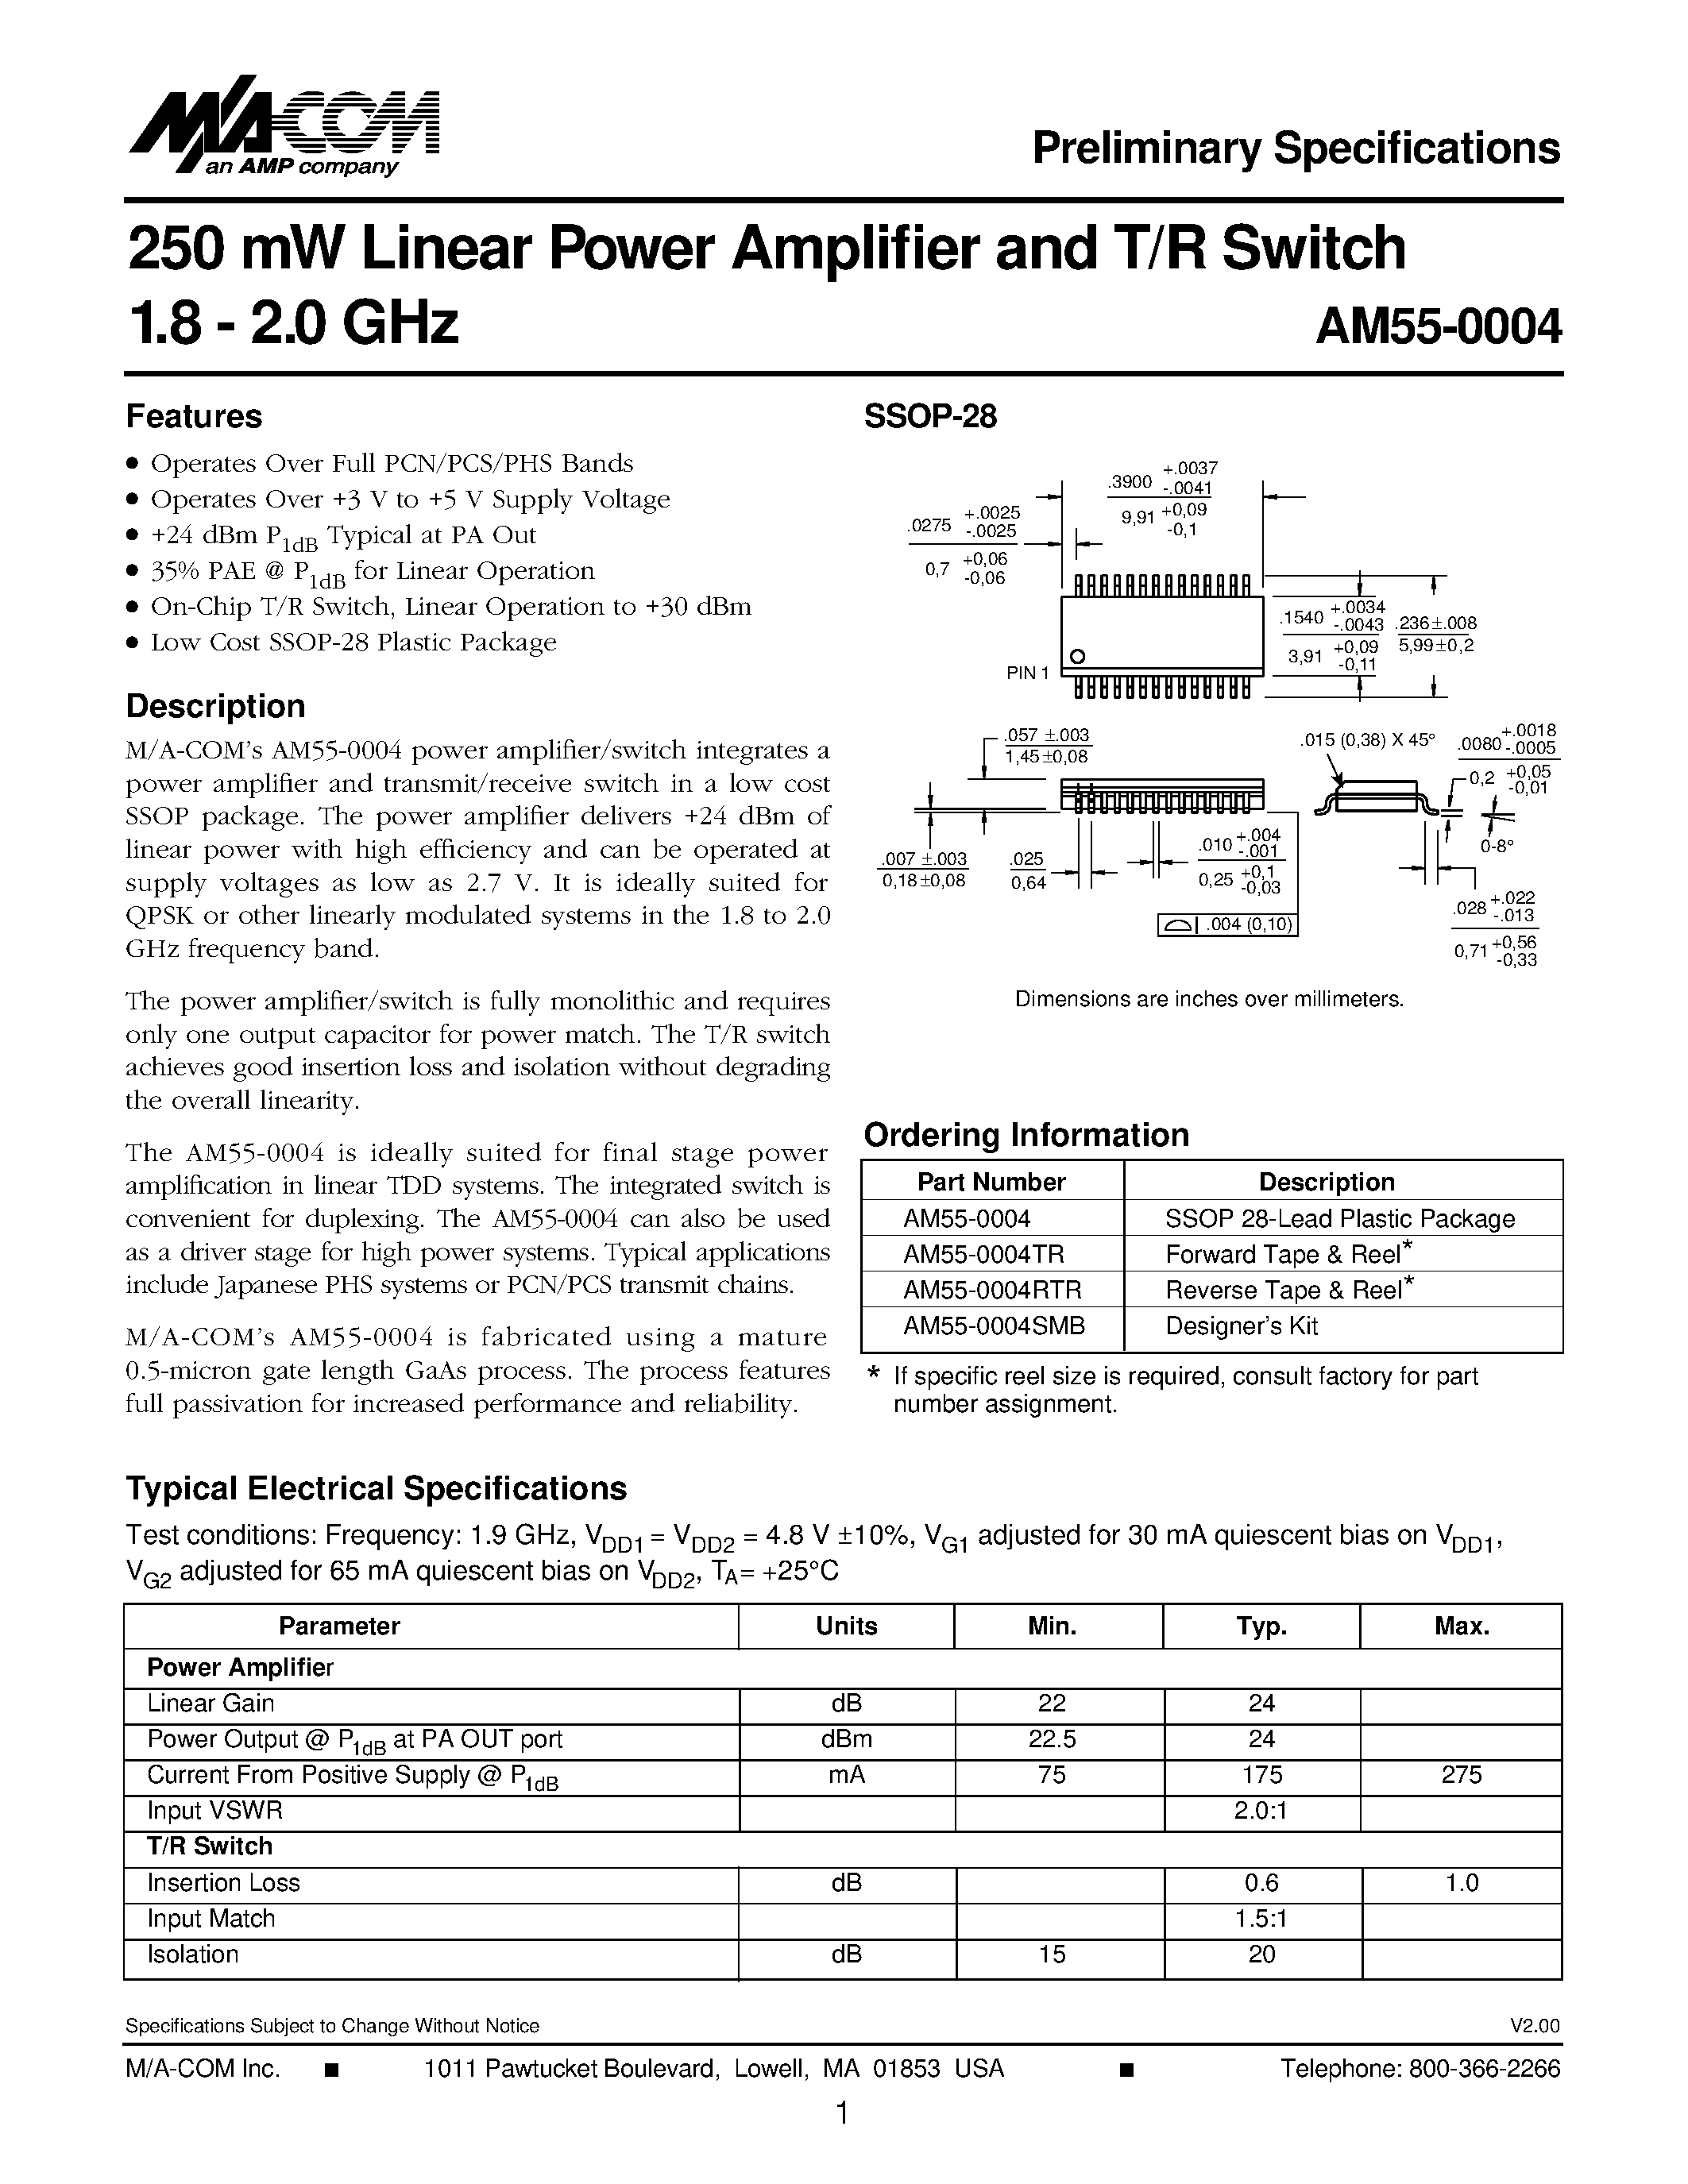 Даташит AM55-0004 - 250 mW Linear Power Amplifier and T/R Switch 1.8 - 2.0 GHz страница 1